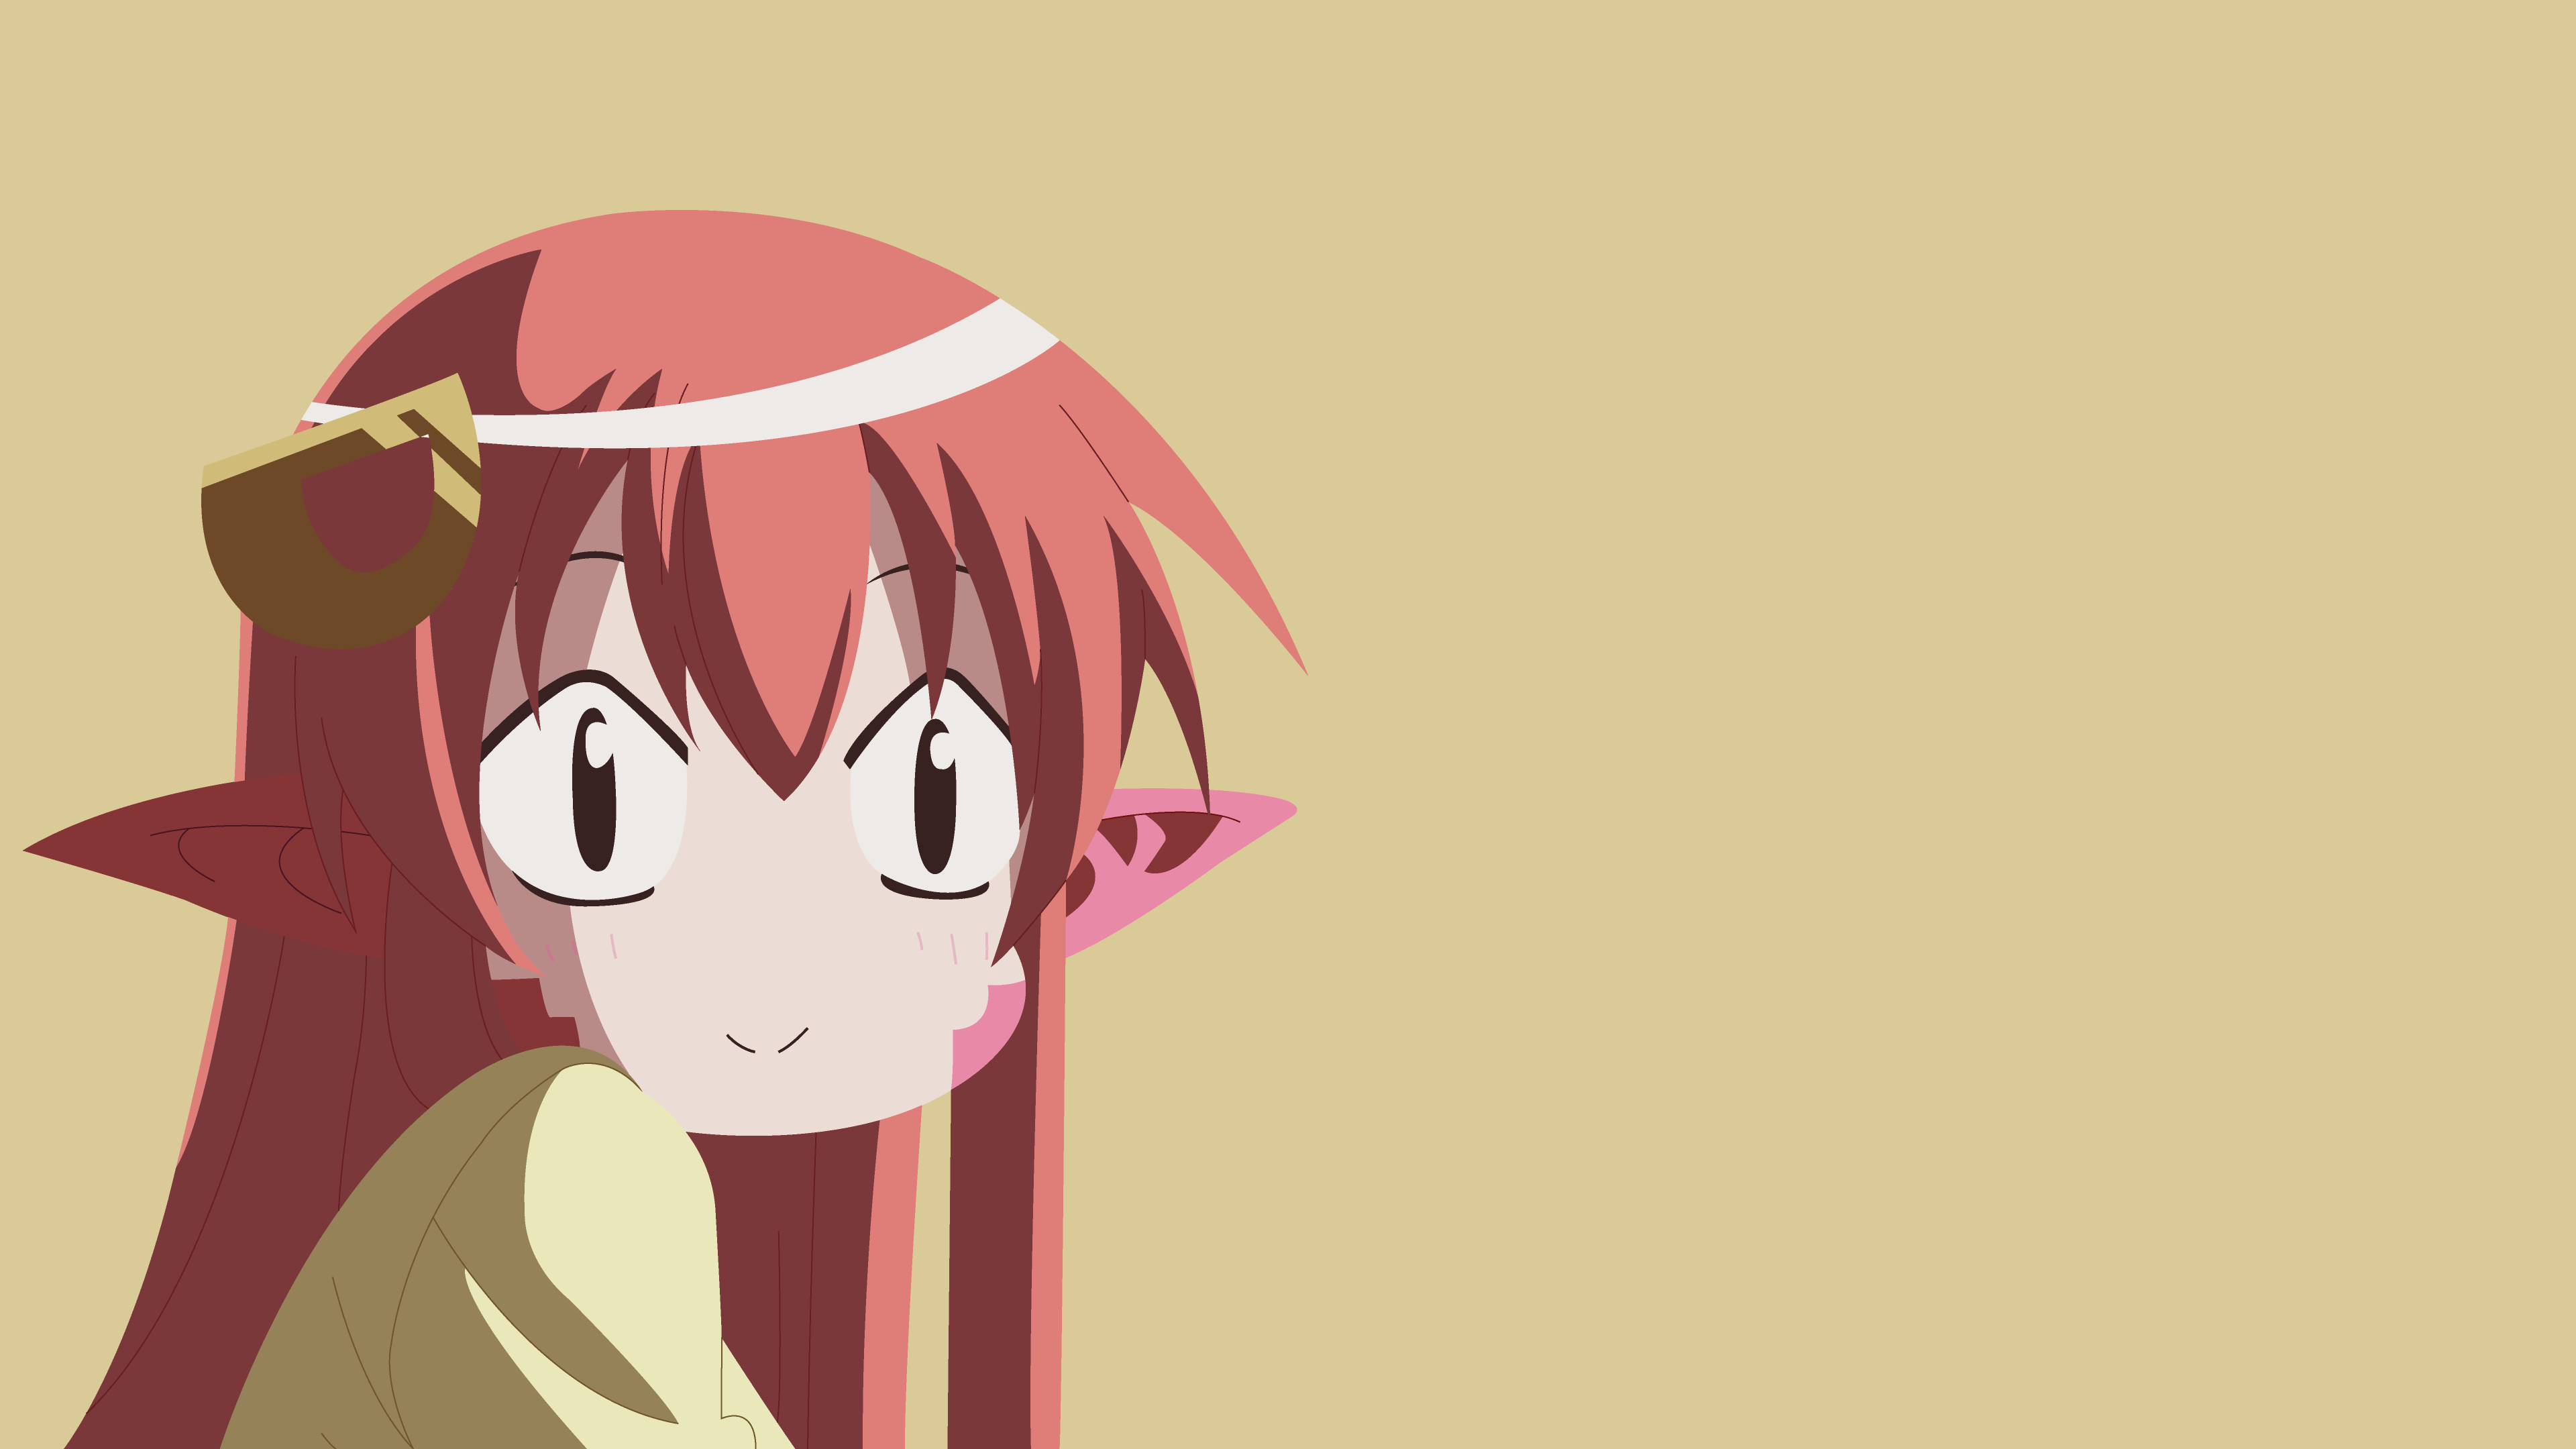 Miia From Monster Musume Wallpapers